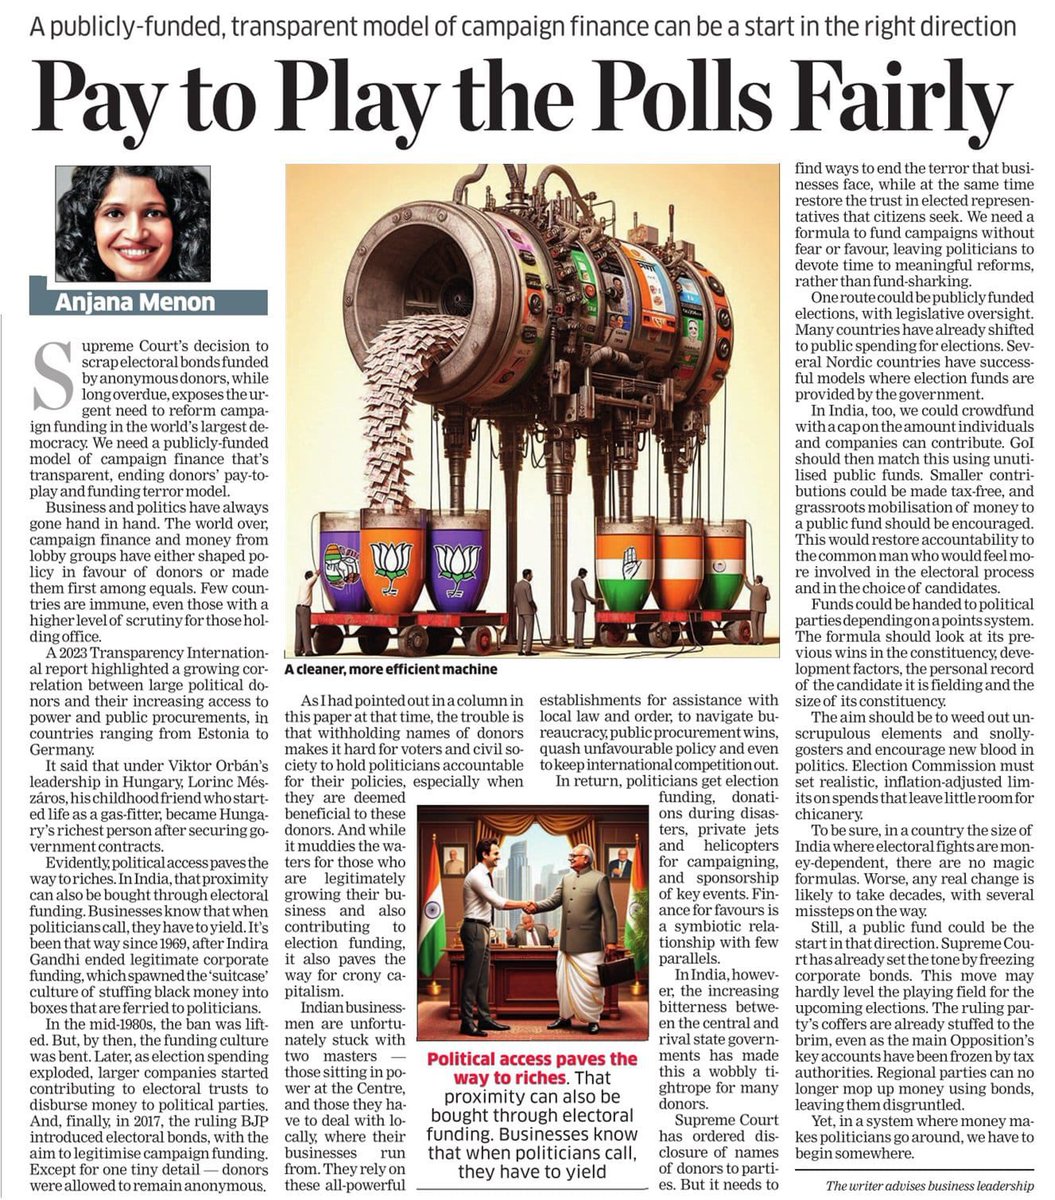 ‘We need a formula to fund campaigns without fear or favour, leaving politicians to devote time to meaningful reforms, rather than fund-sharking.’ @menonanj #ElectoralBonds #elections